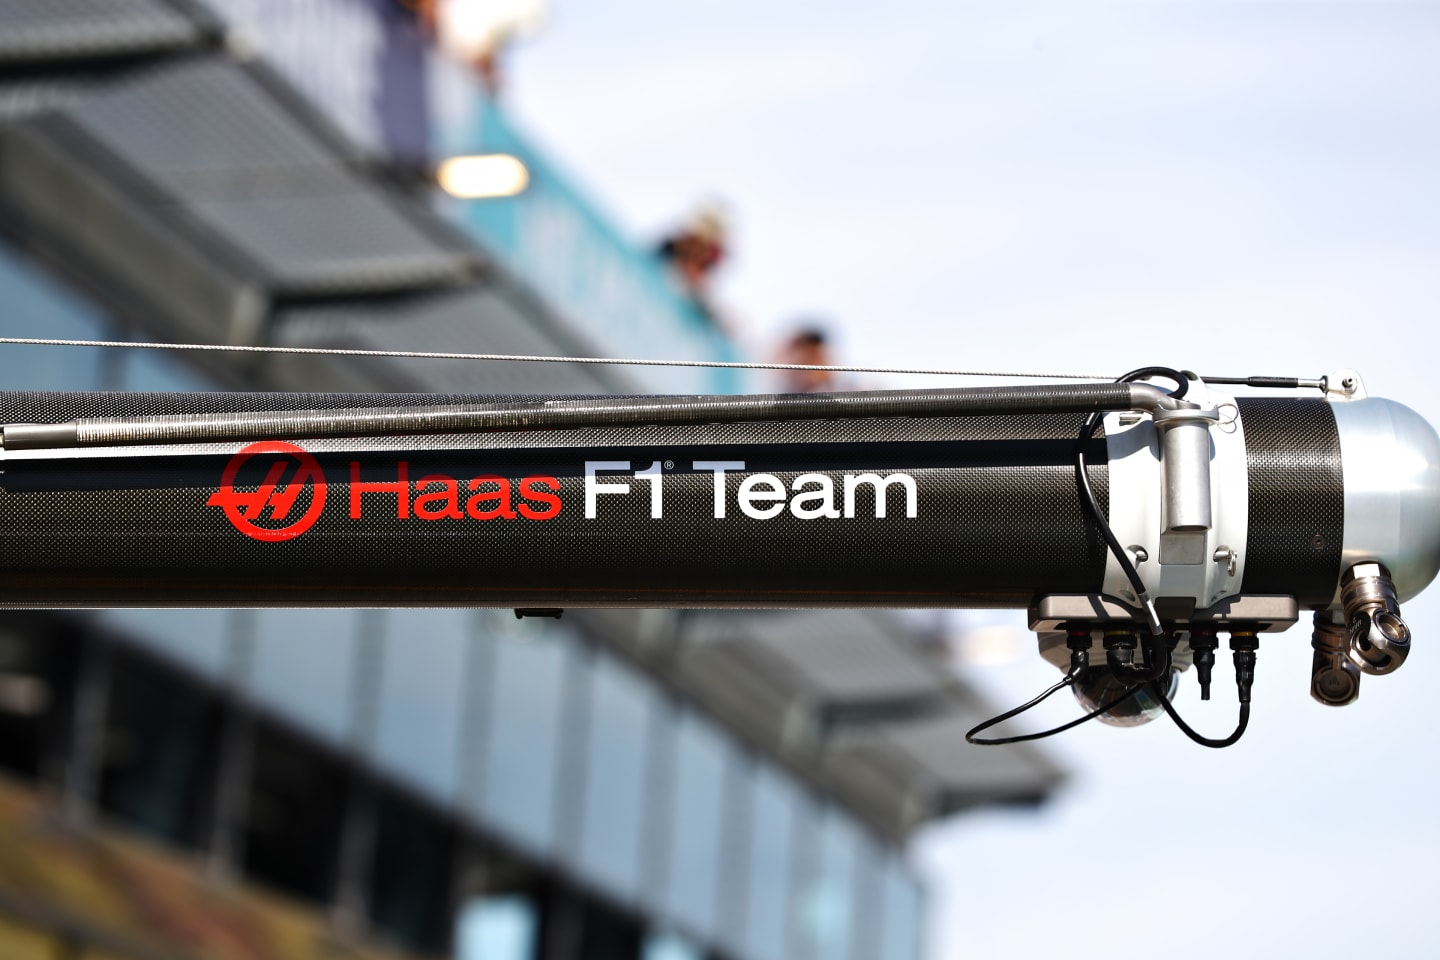 MELBOURNE, AUSTRALIA - MARCH 12: Haas F1 pitstop equipment is pictured during previews ahead of the